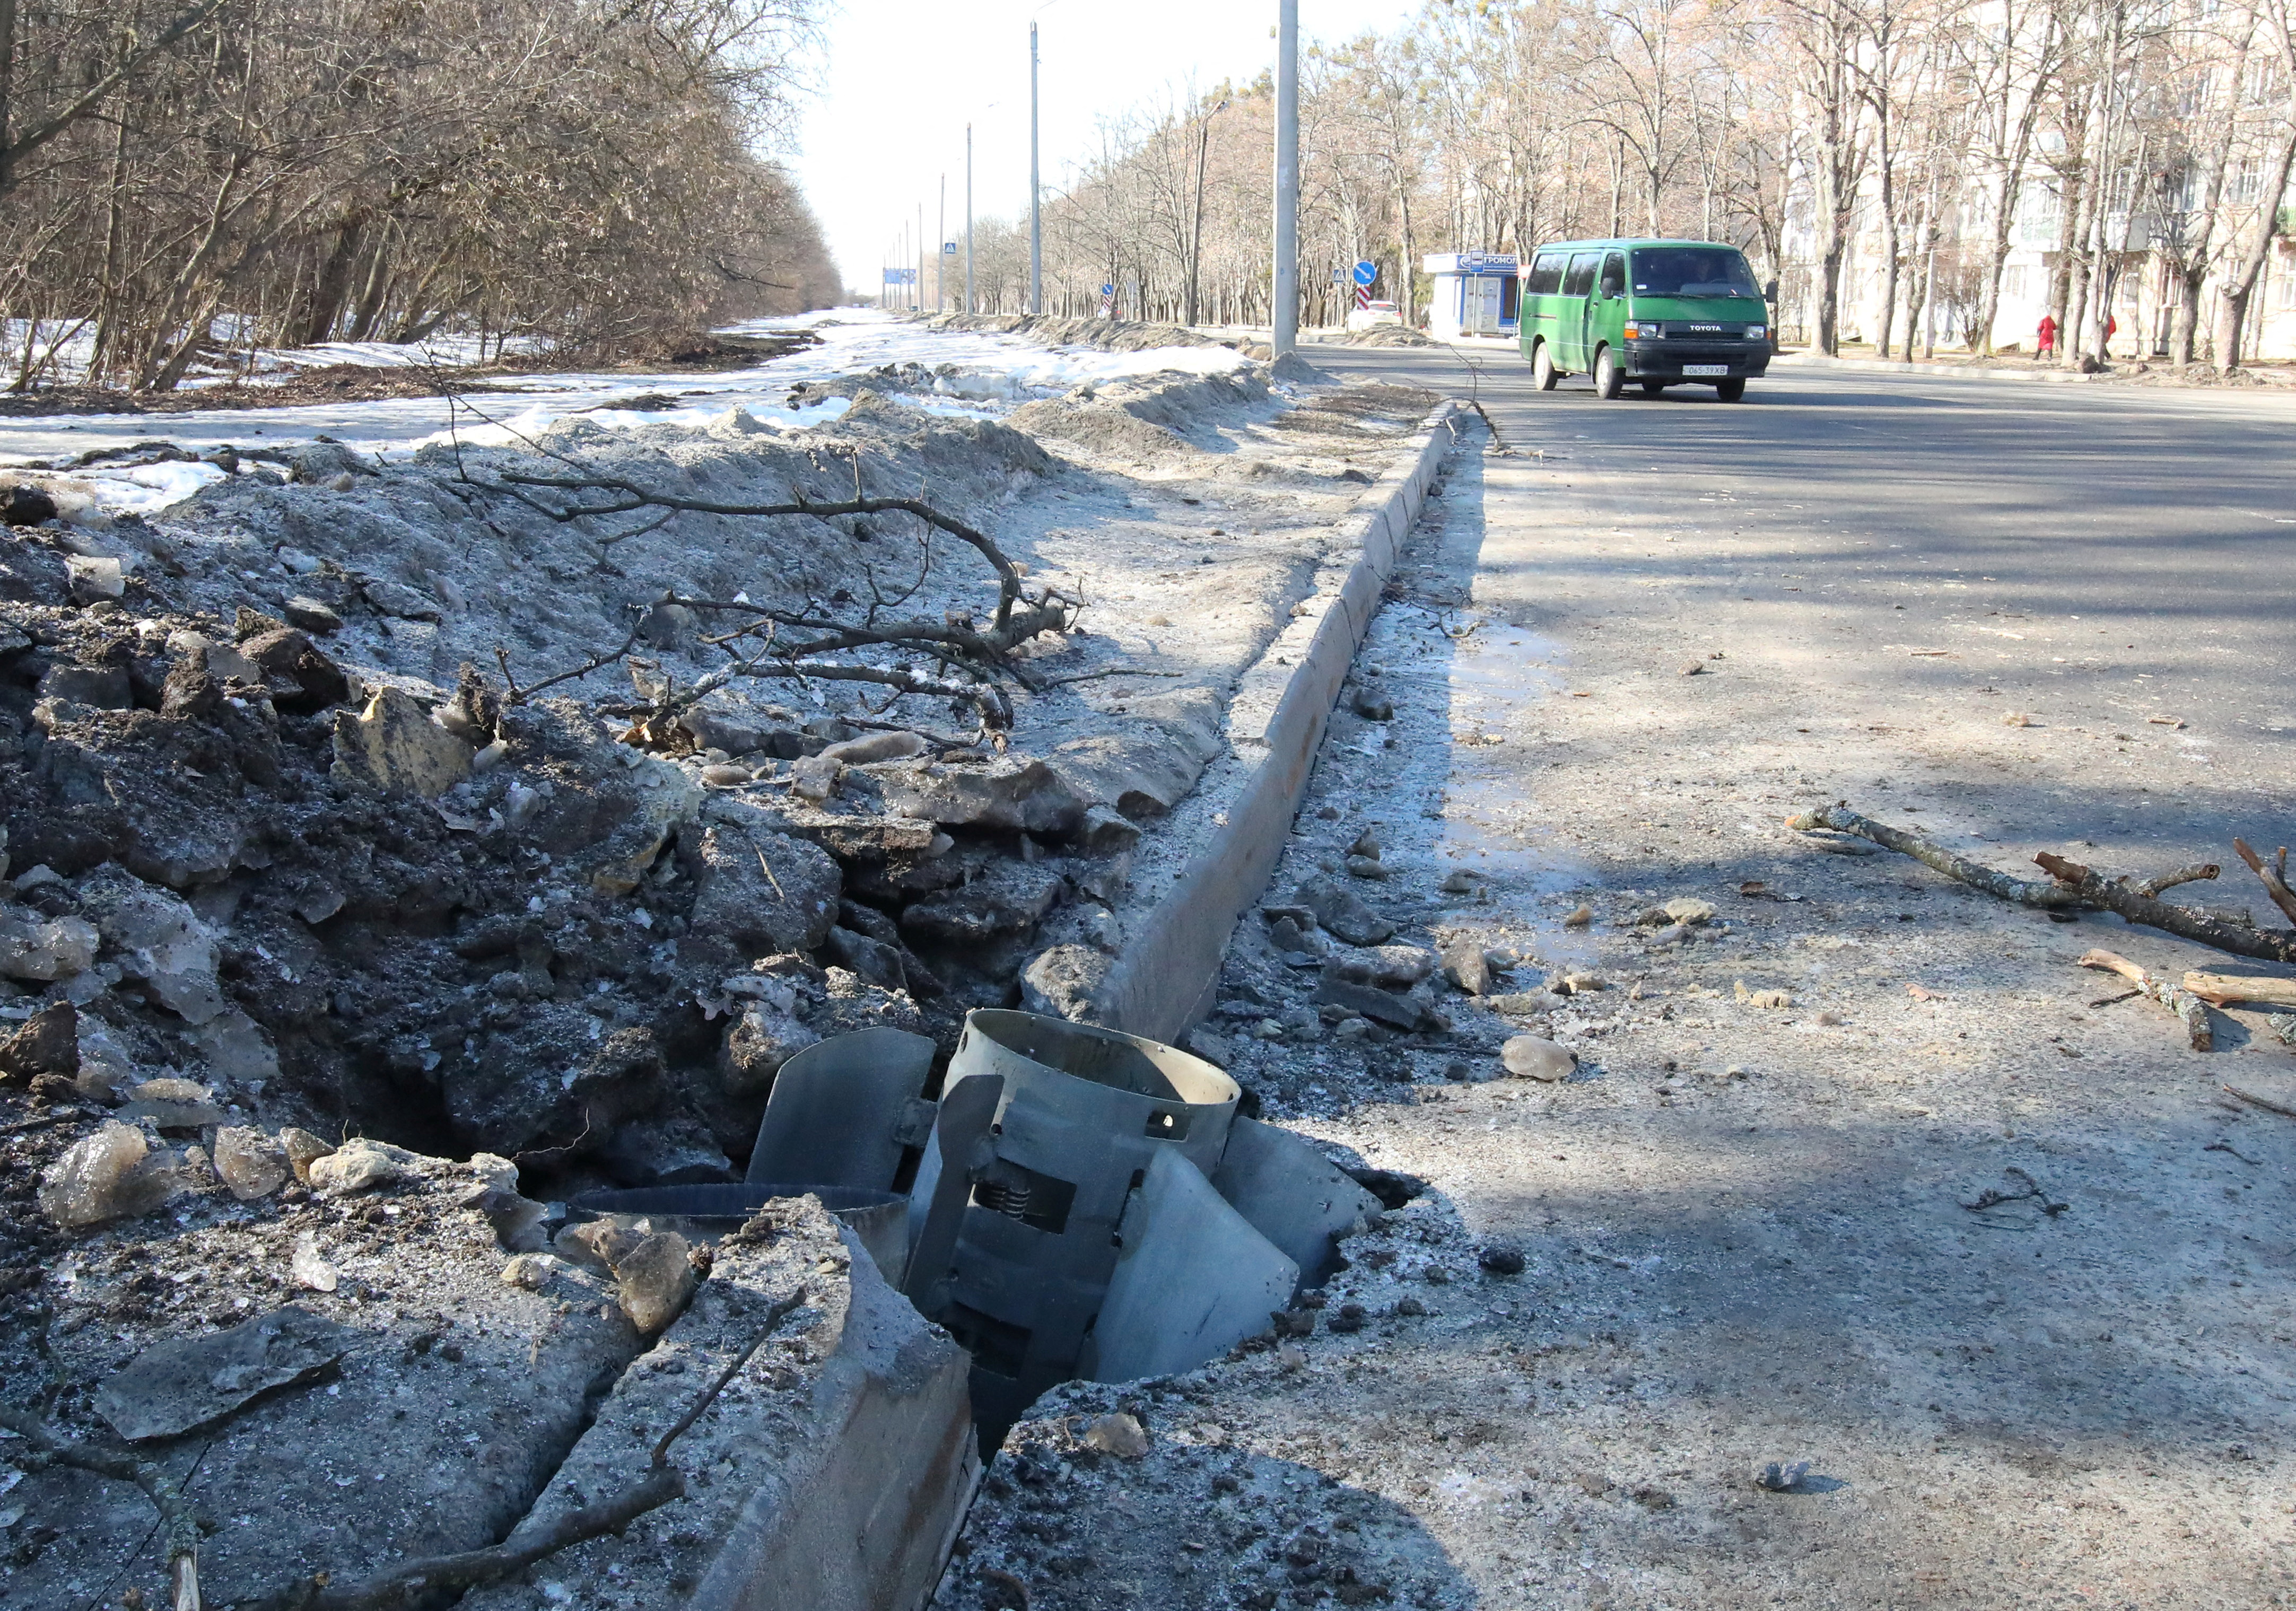 Aftermath of shelling in Kharkiv